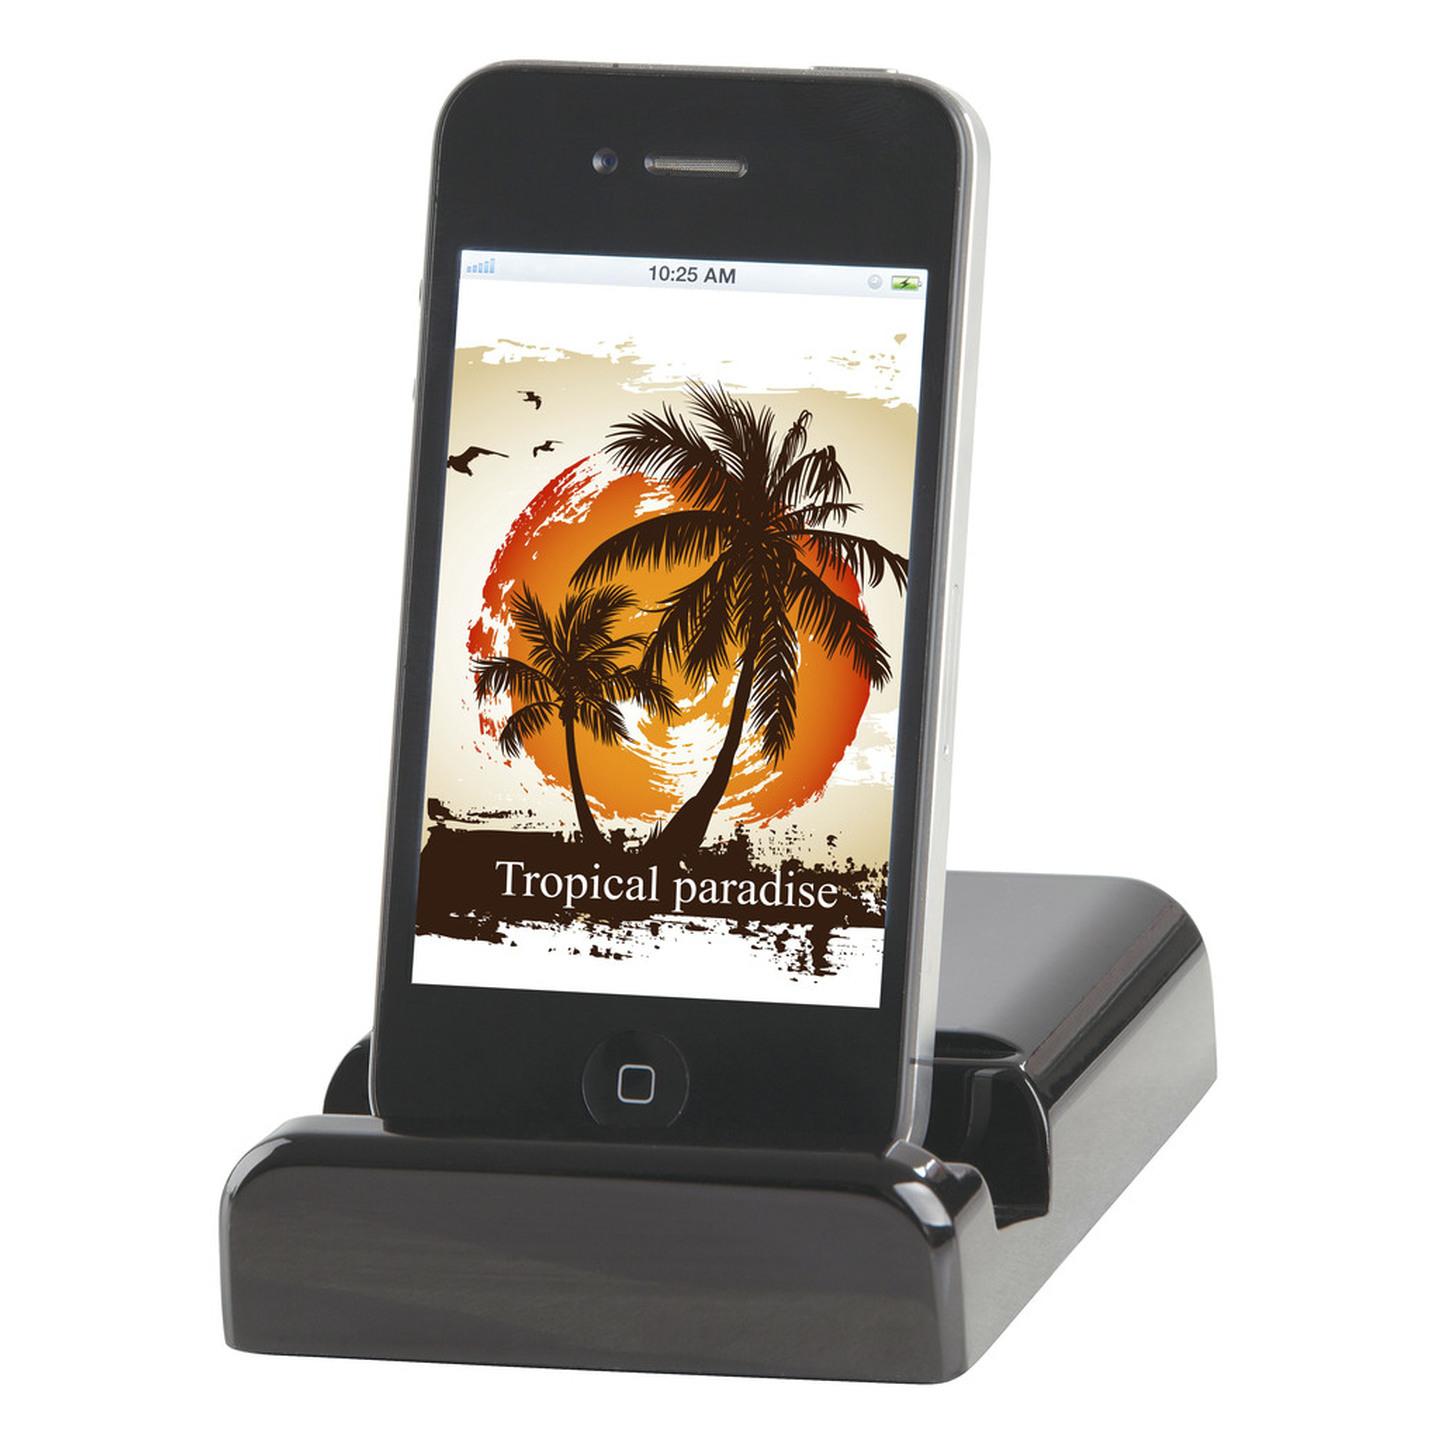 iPad/iPhone/iPod Docking Station with Audio Out